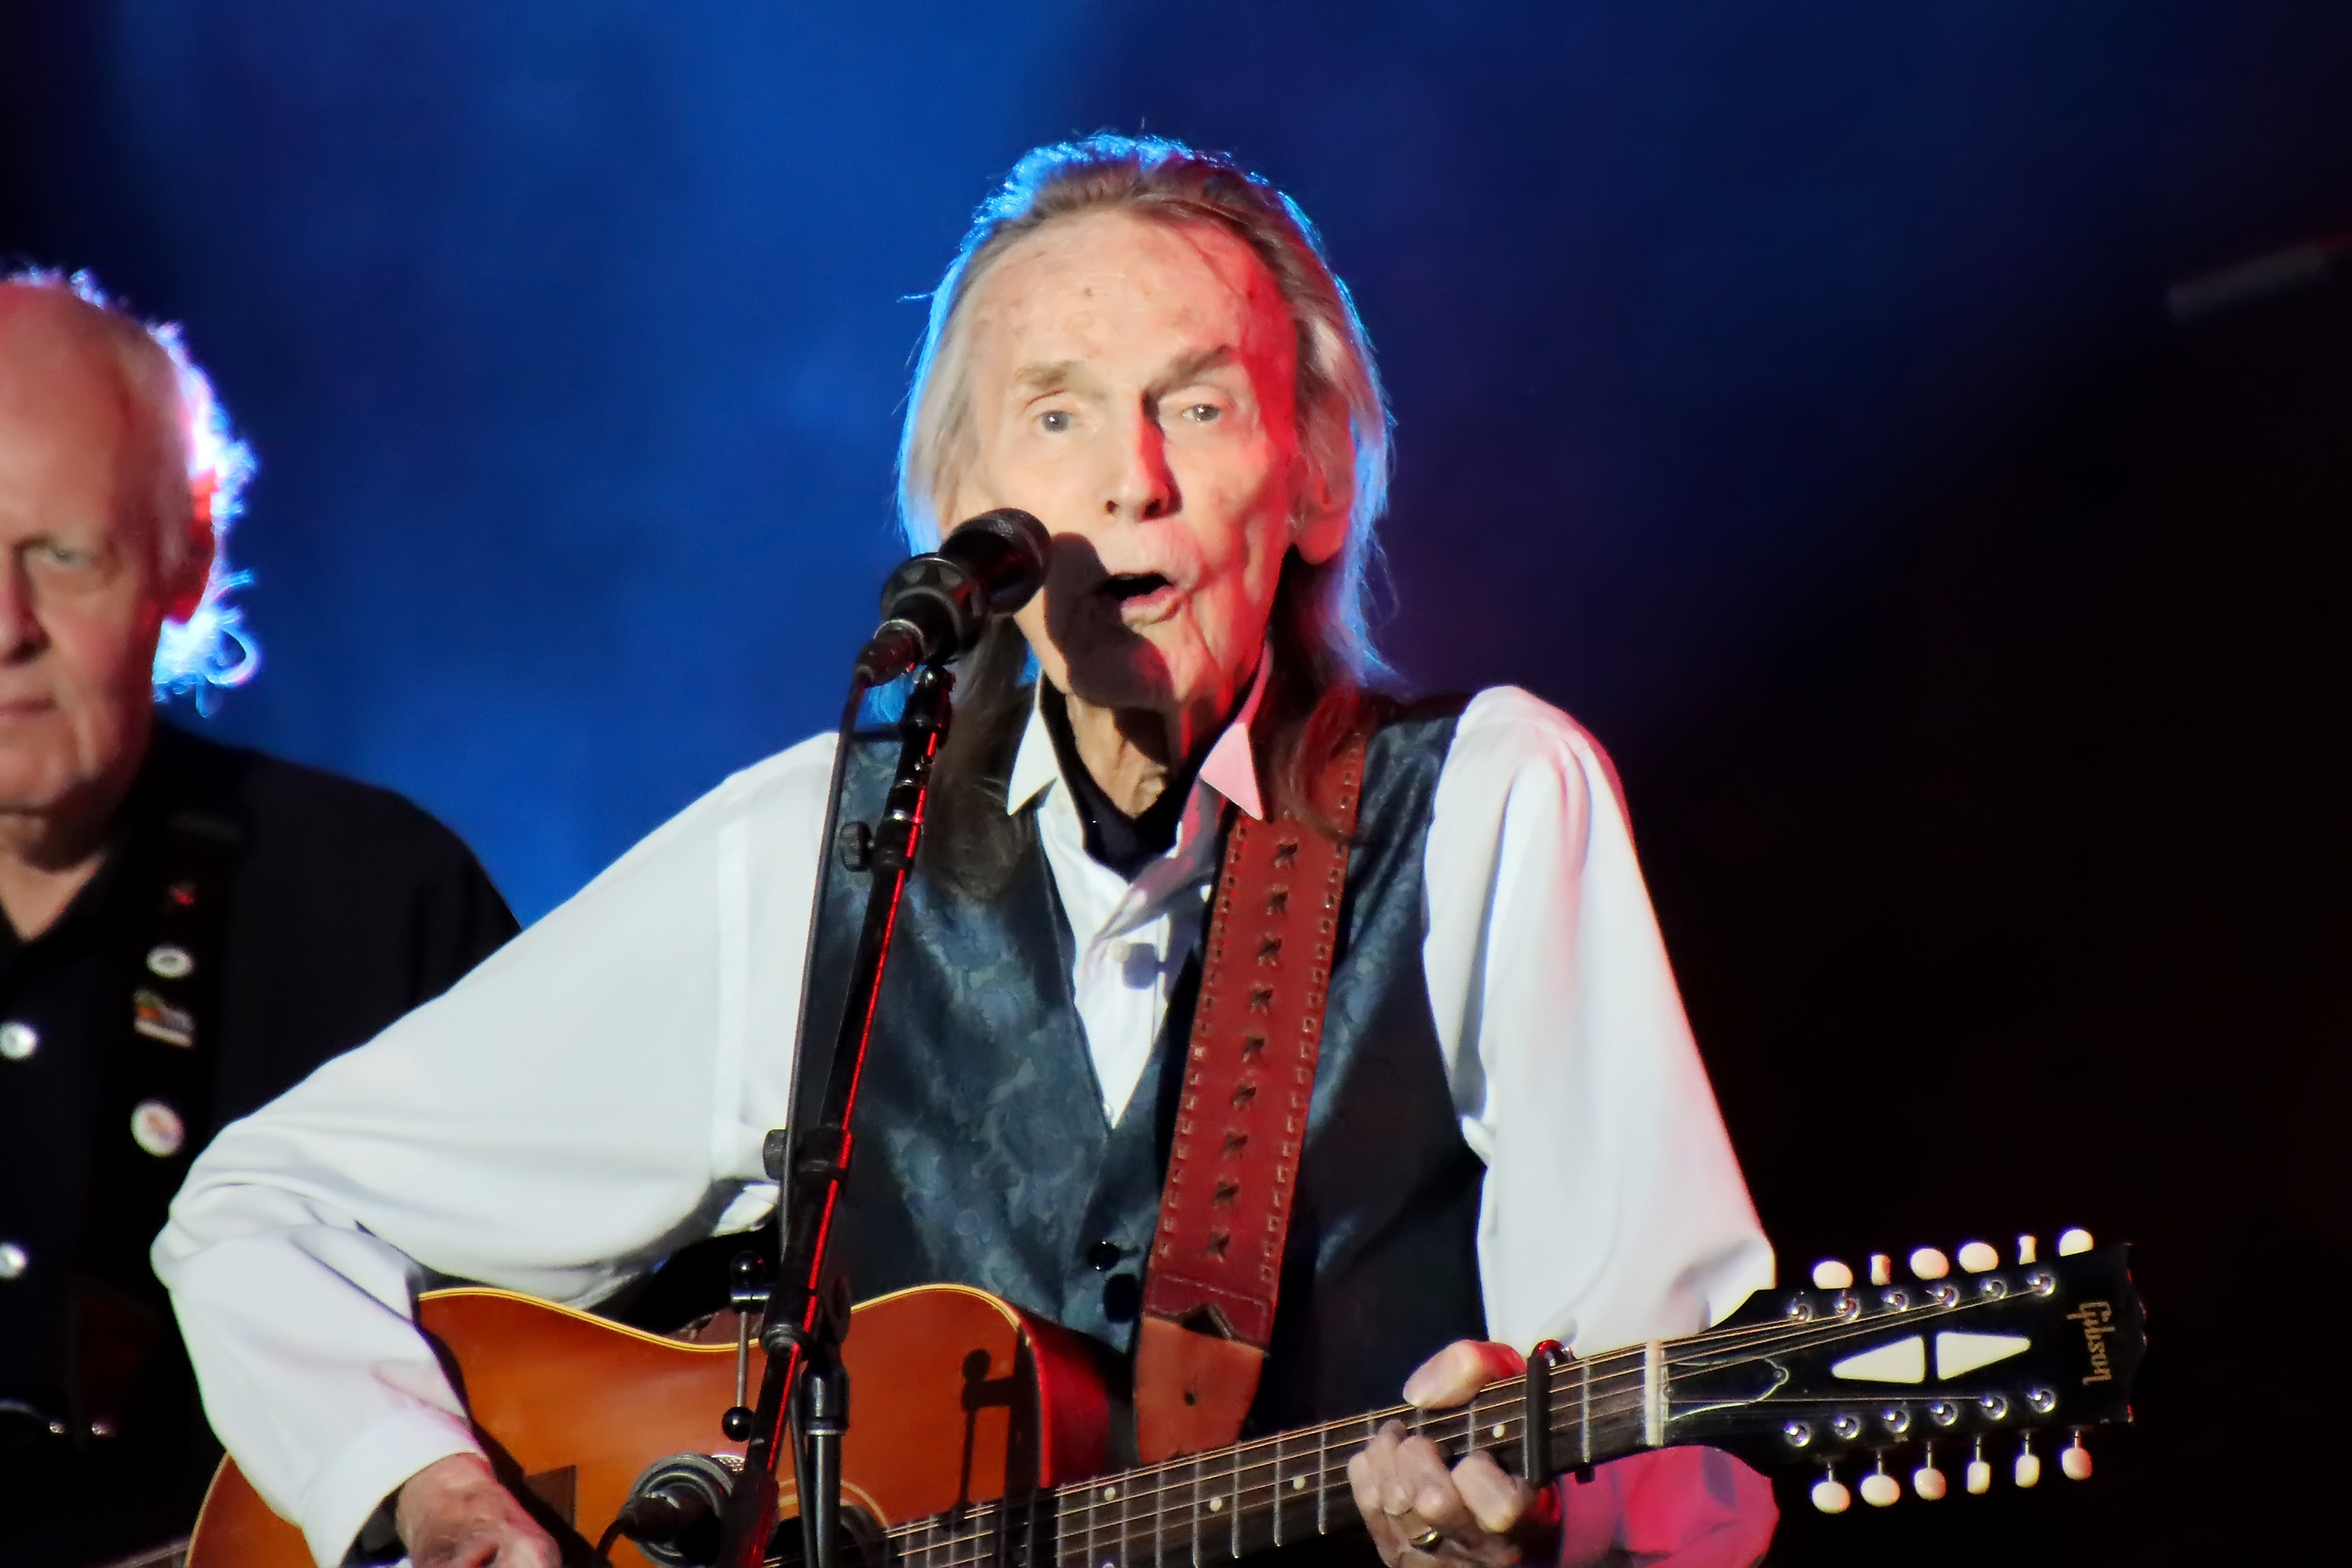 Gordon Lightfoot performs in concert at Ocean City Music Pier on July 18, 2022 in Ocean City, New Jersey | Source: Getty Images